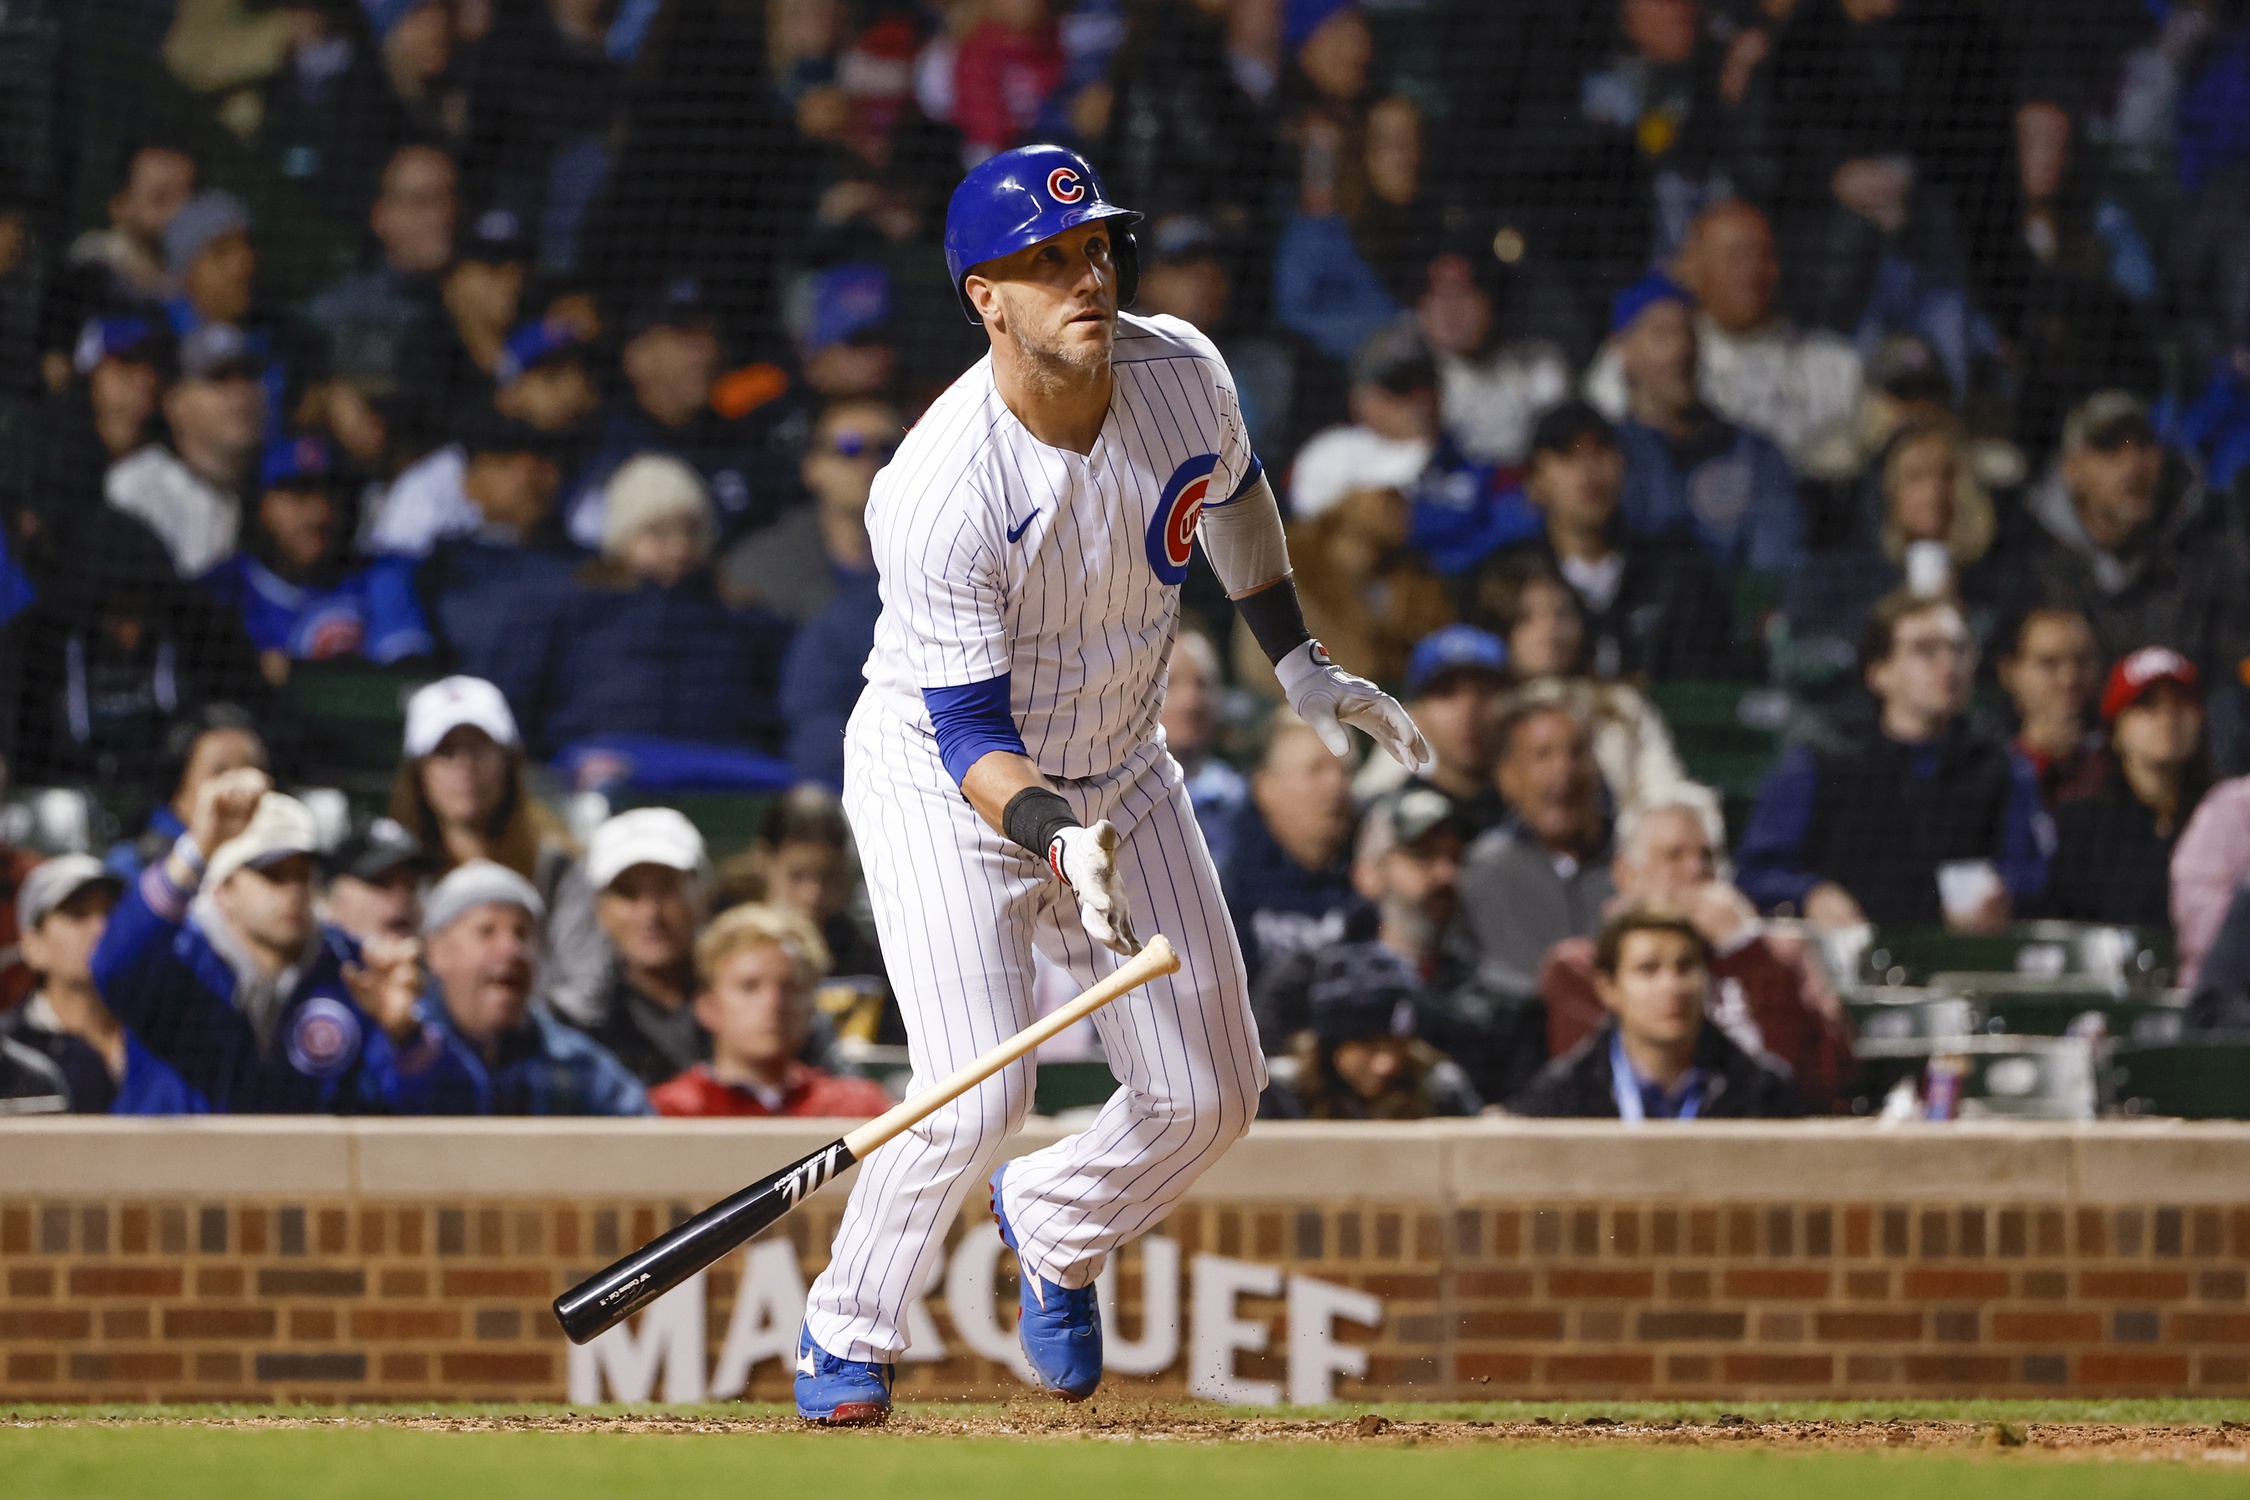 2023 Chicago Cubs Predictions and Odds to Win the World Series